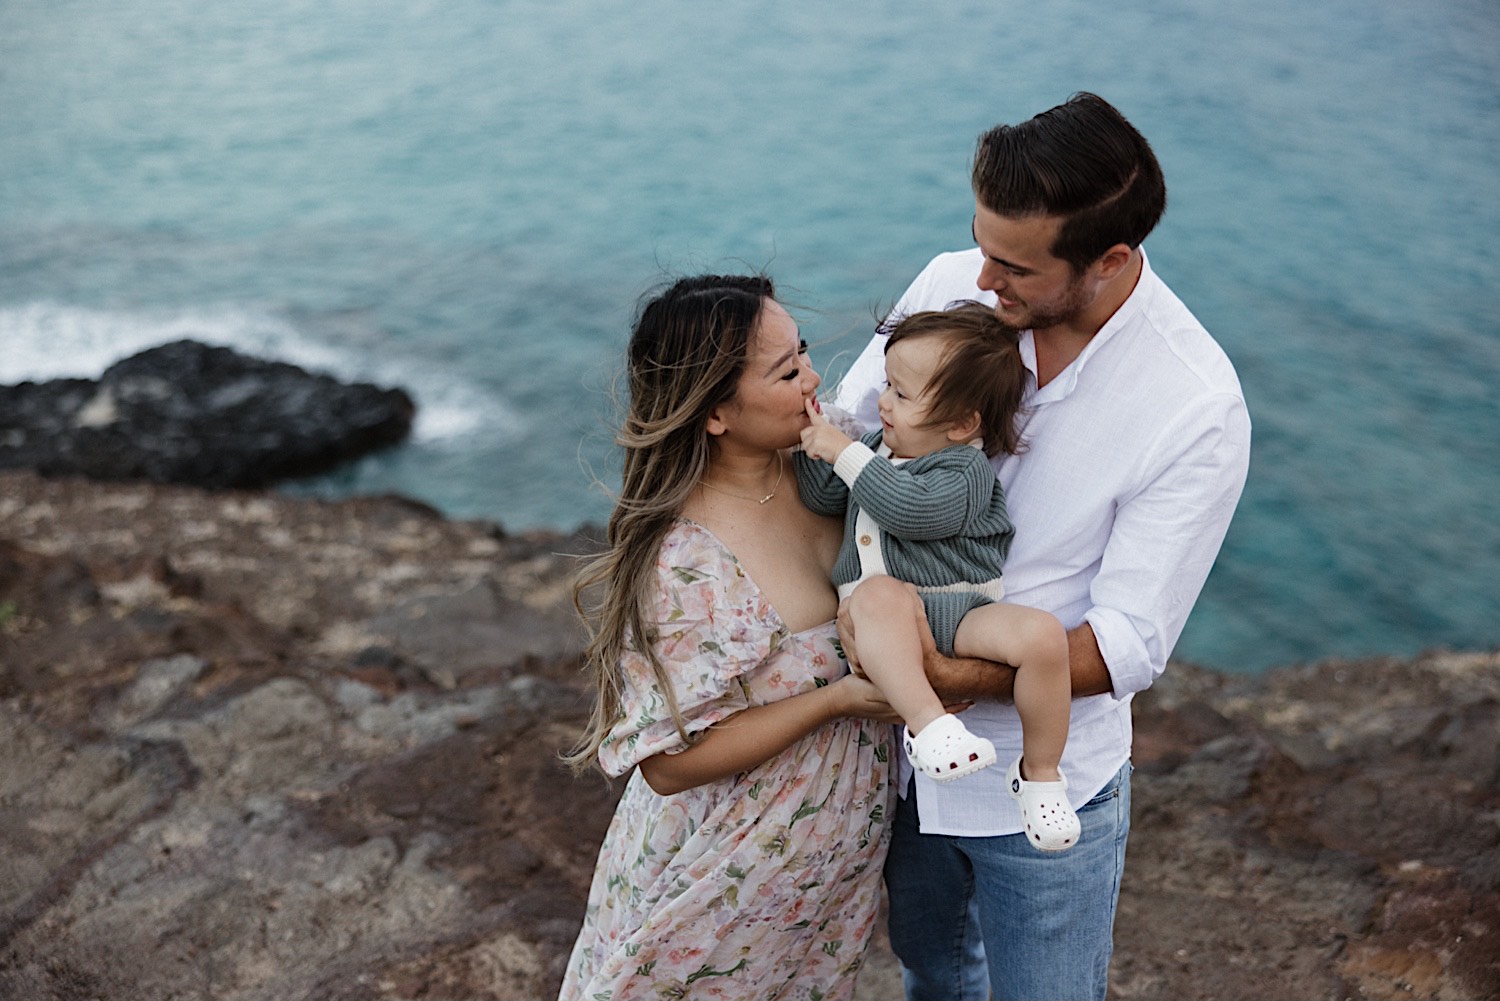 A mother and father hold their young child who is touching the mother's face, this is during their family session at Makapuu Lookout on Oahu